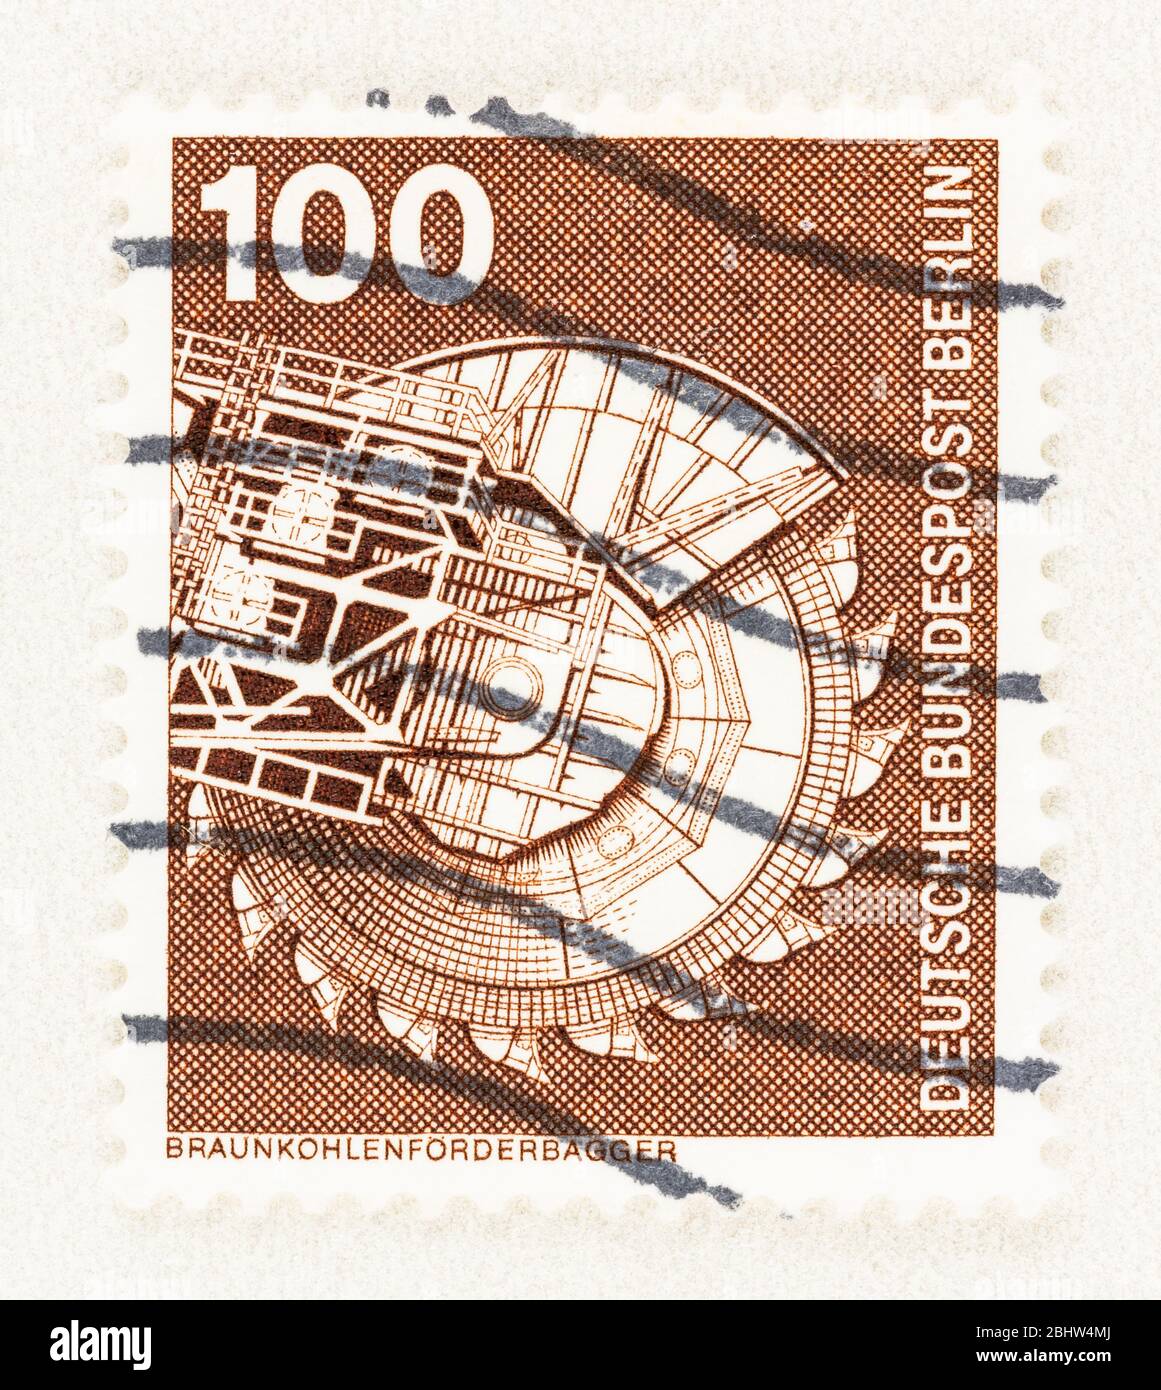 SEATTLE WASHINGTON - April 26, 2020:  Brown German stamp featuring lignite (brown coal)  excavator and conveyor, issued as part of the Industry and Te Stock Photo